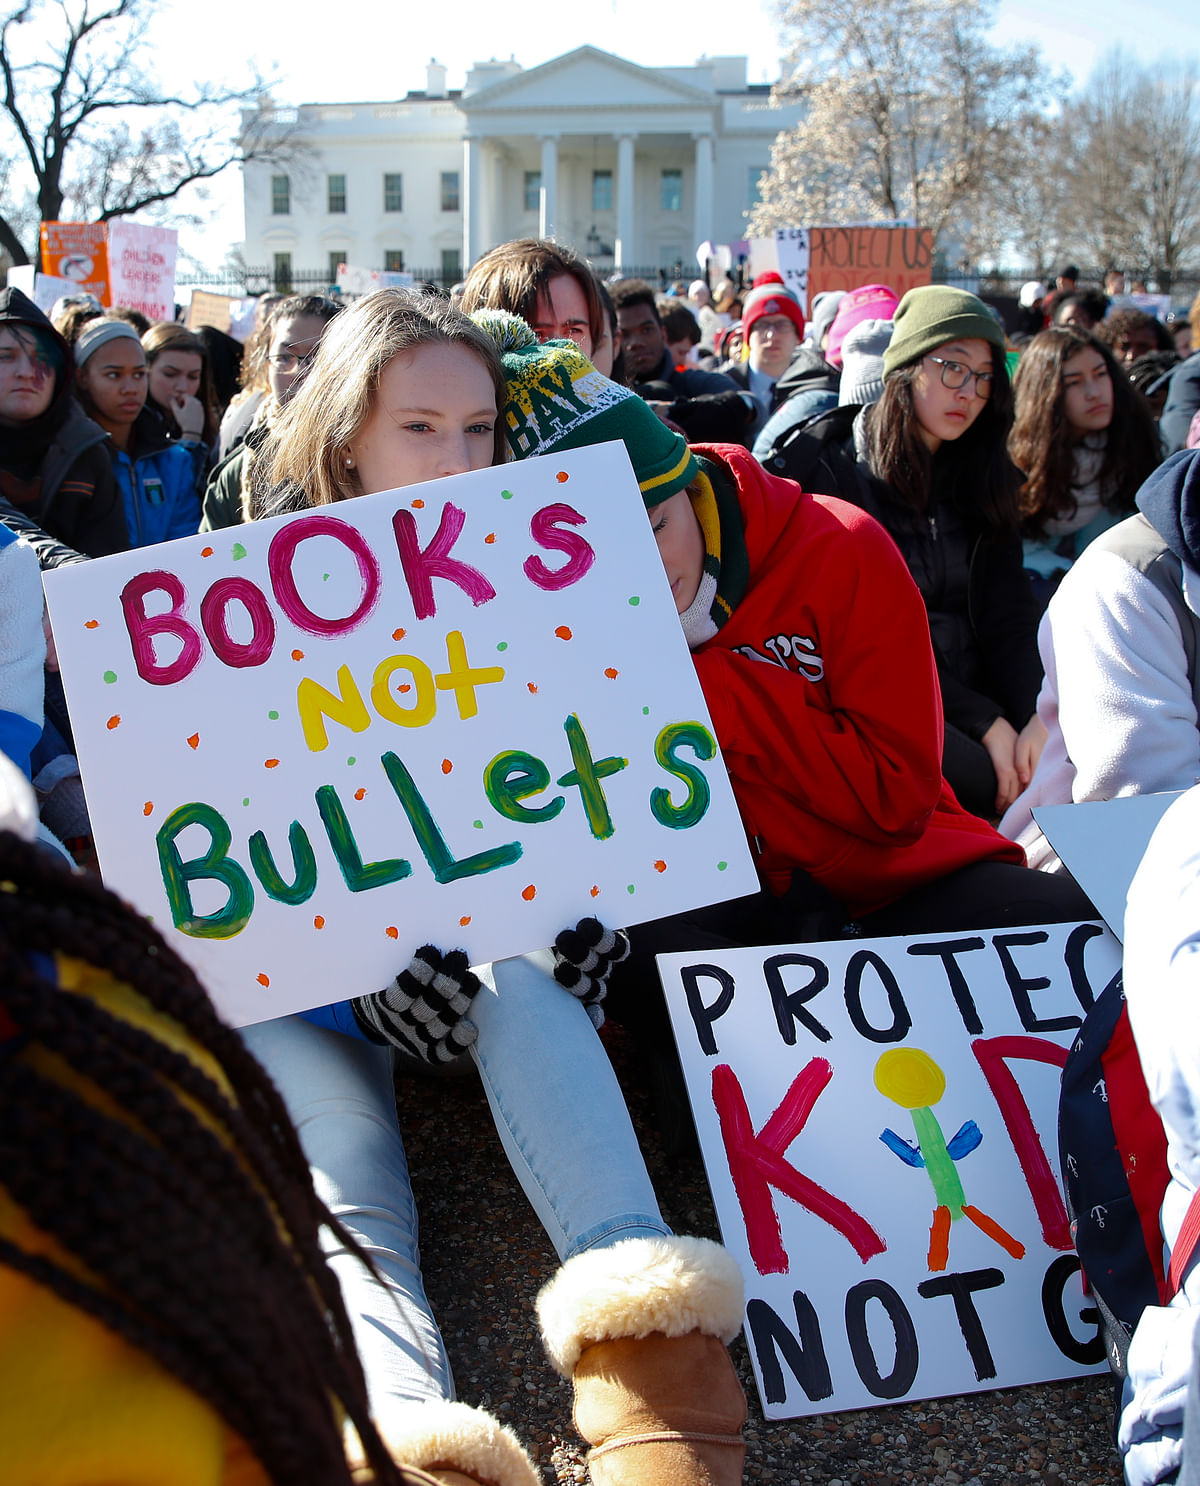 Students all across the US, in solidarity, protested against gun violence. 